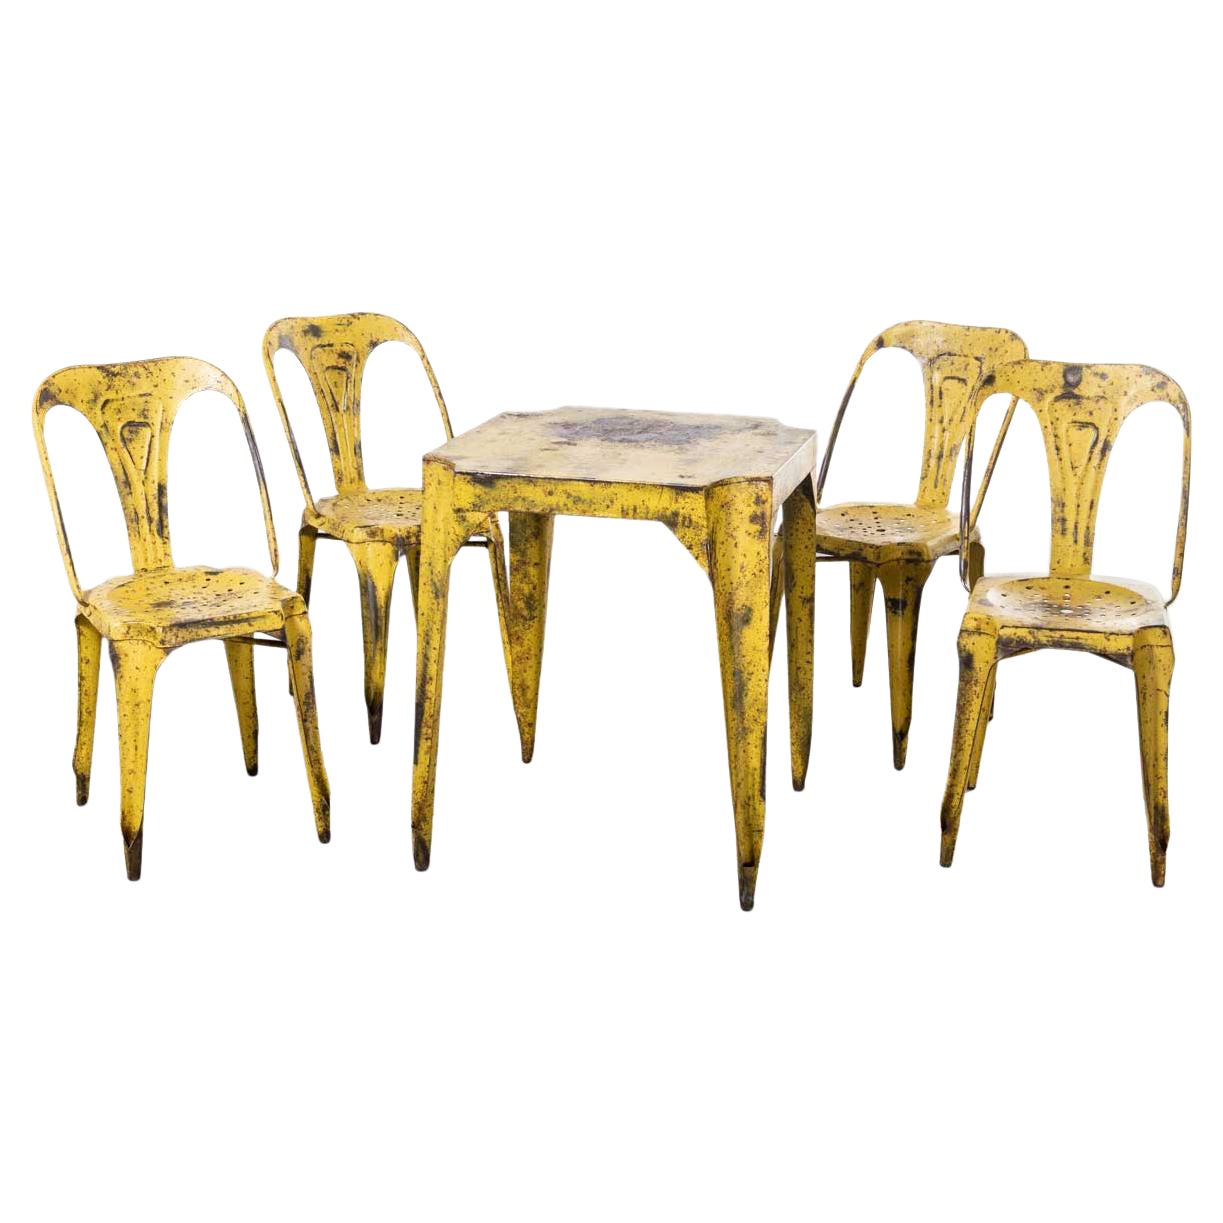 1950's Original French Multipl's Table and Chair Set, Yellow For Sale